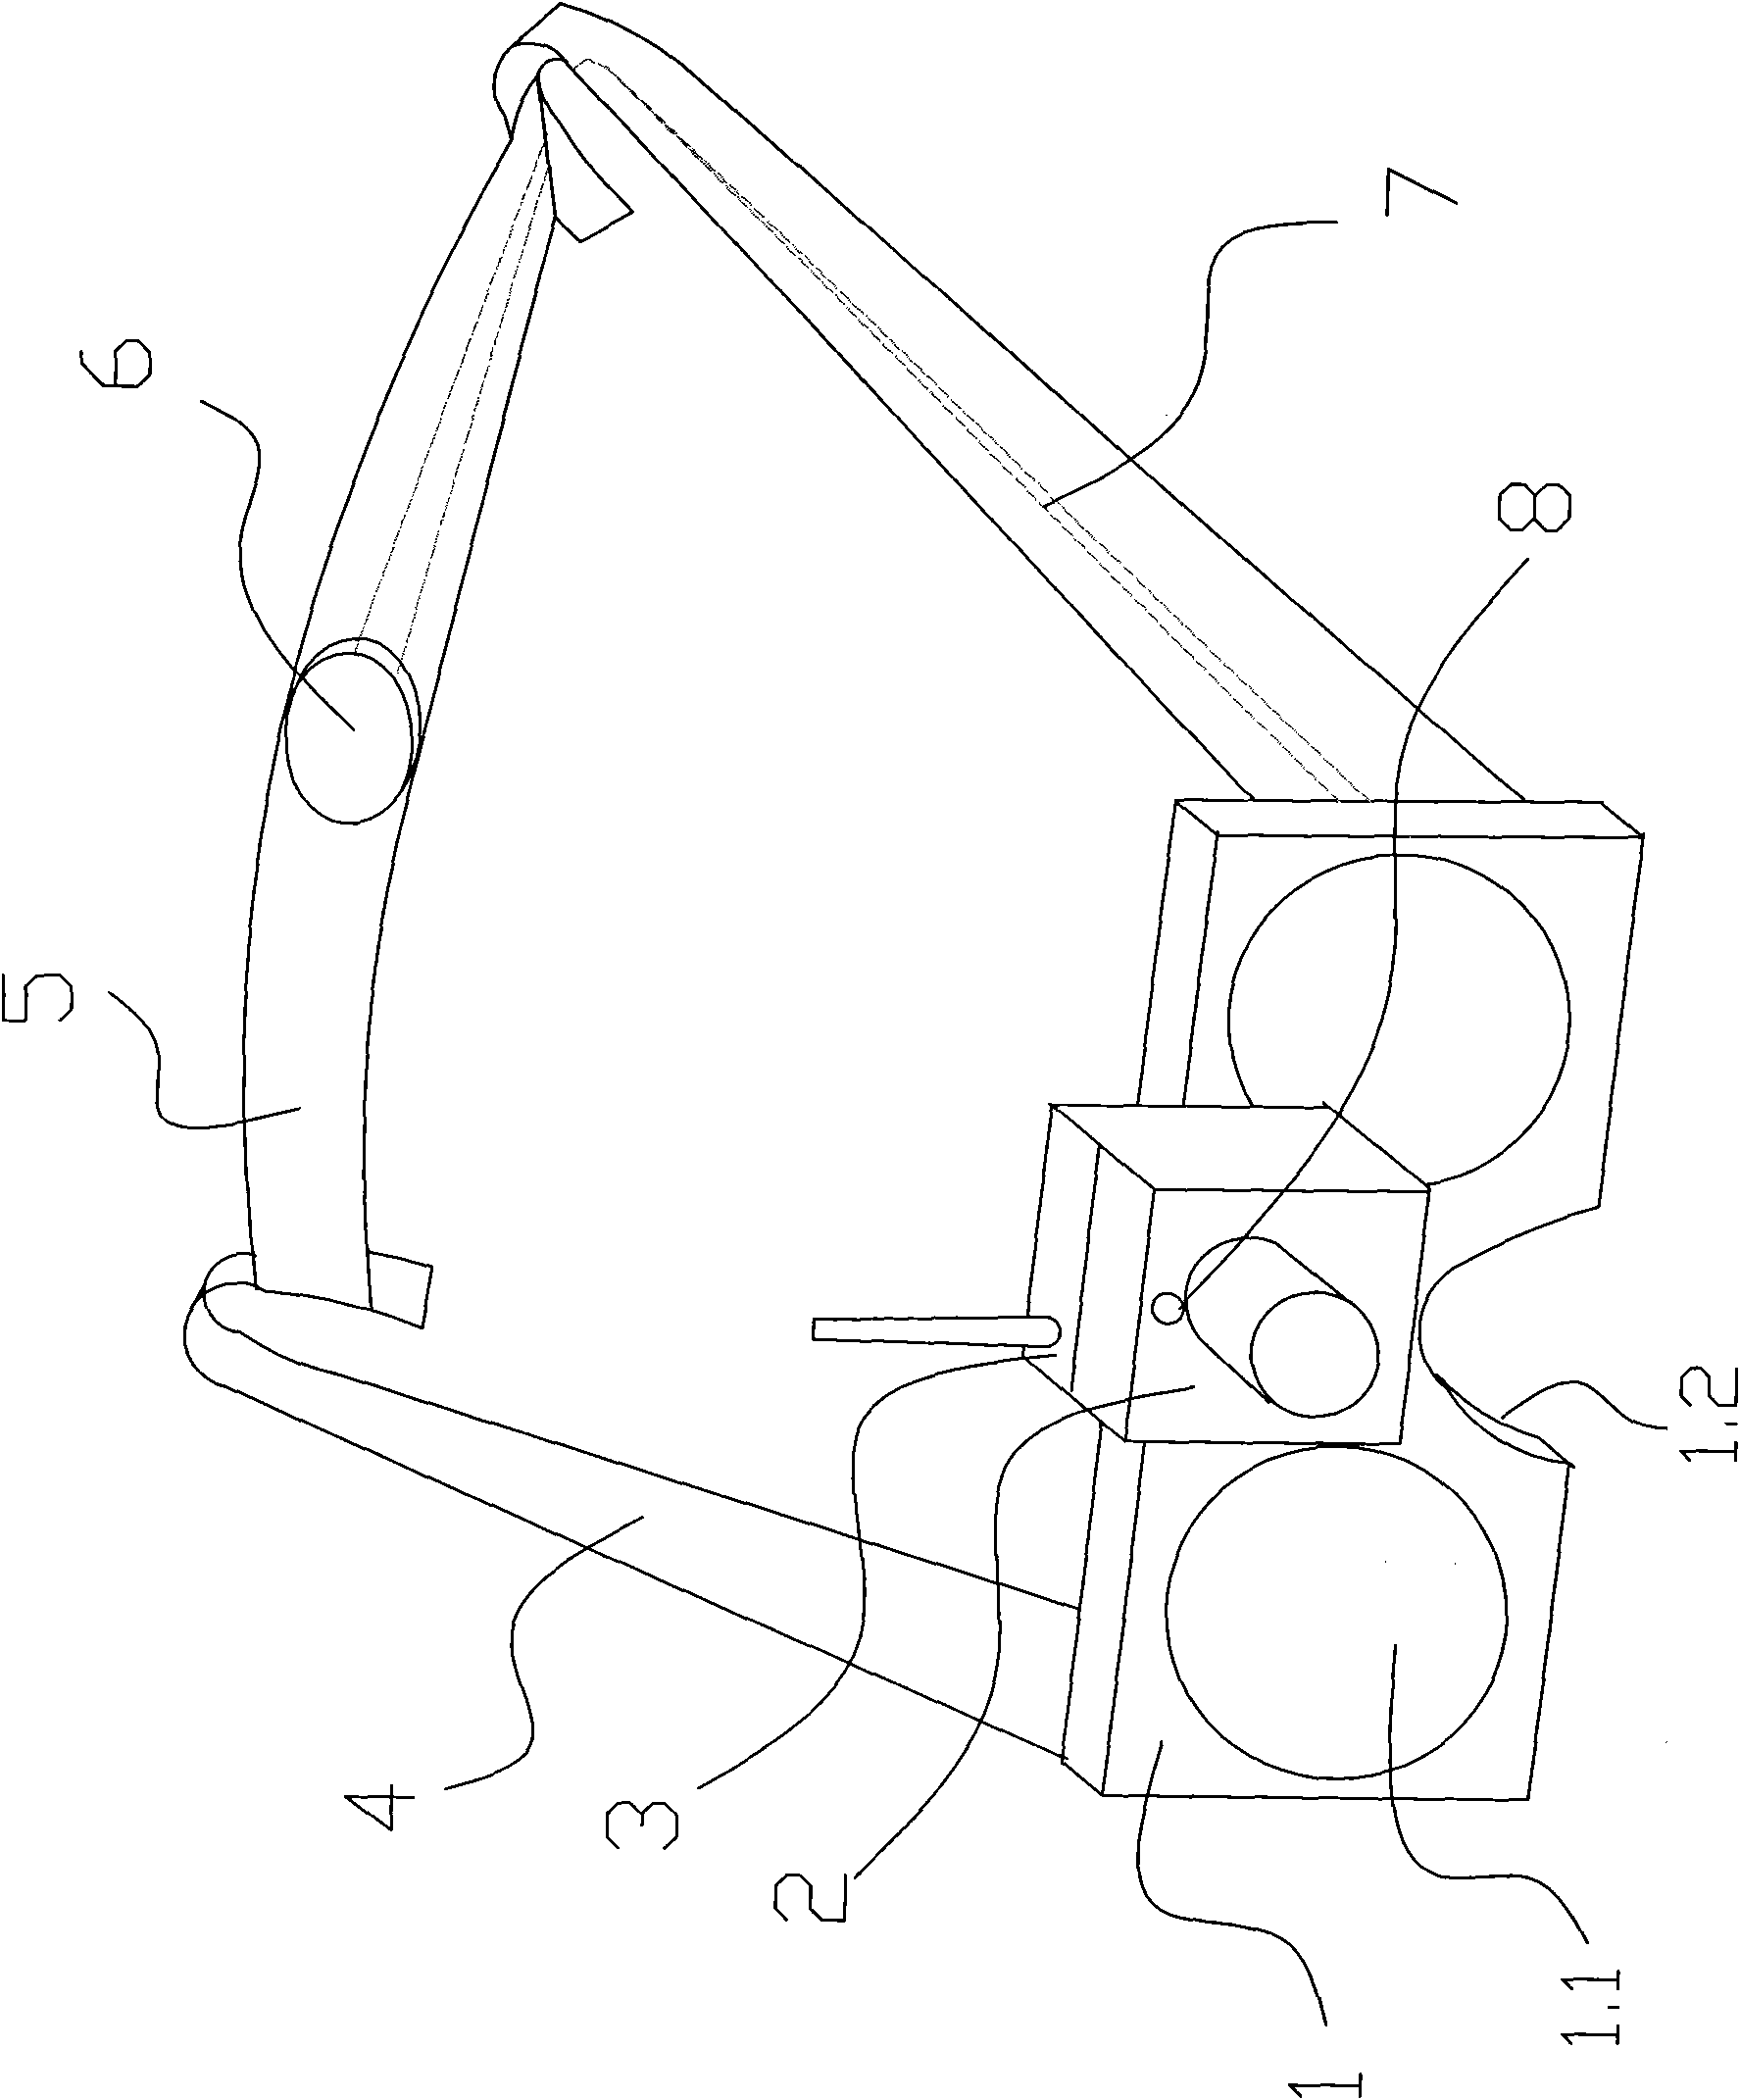 Wearable miniature camera recording device for operation